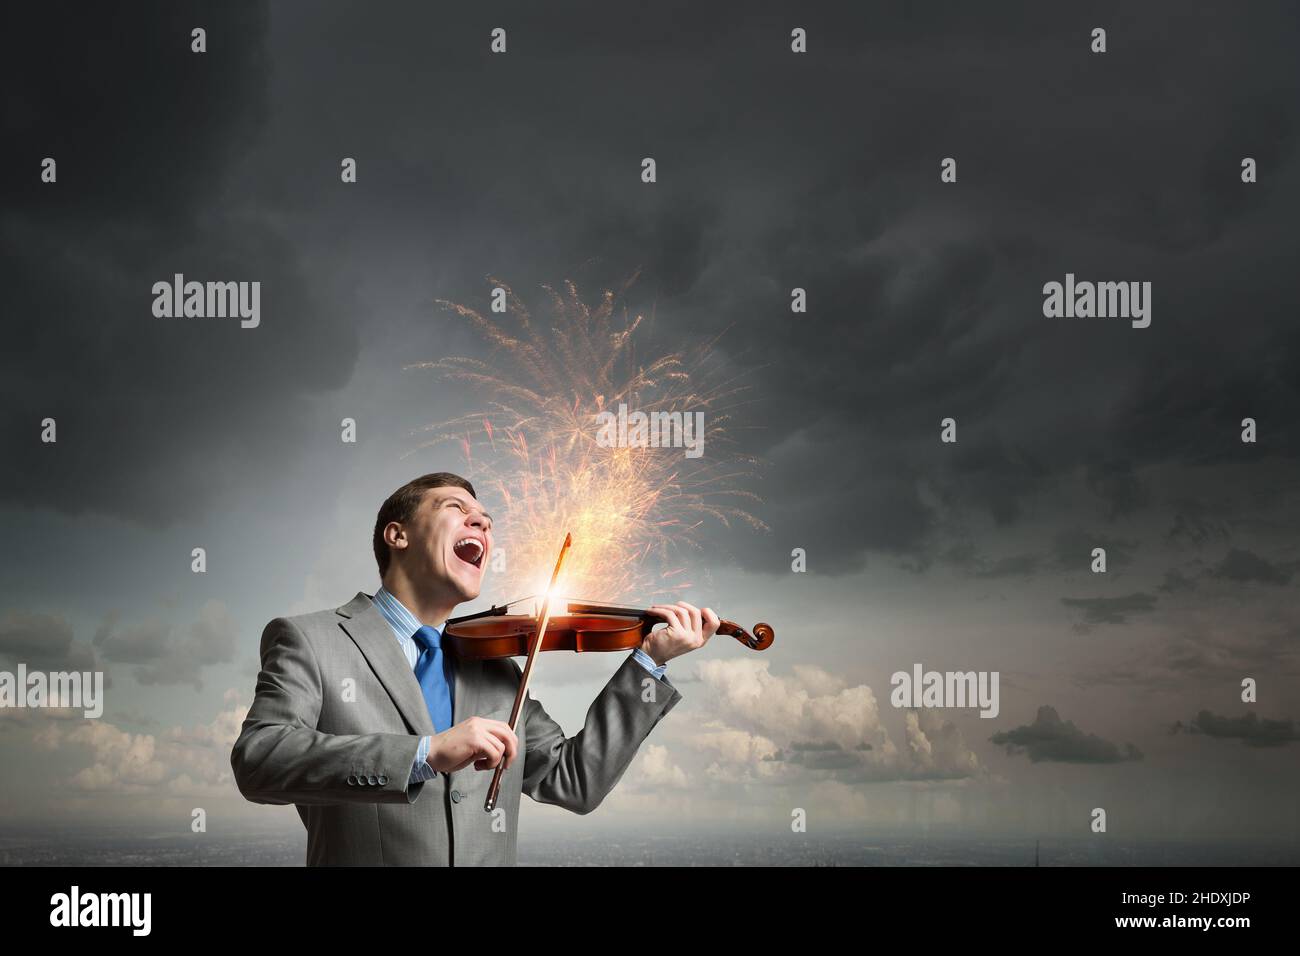 playing music, passionate, violinist, playing musics, passion, passionates, violinists Stock Photo